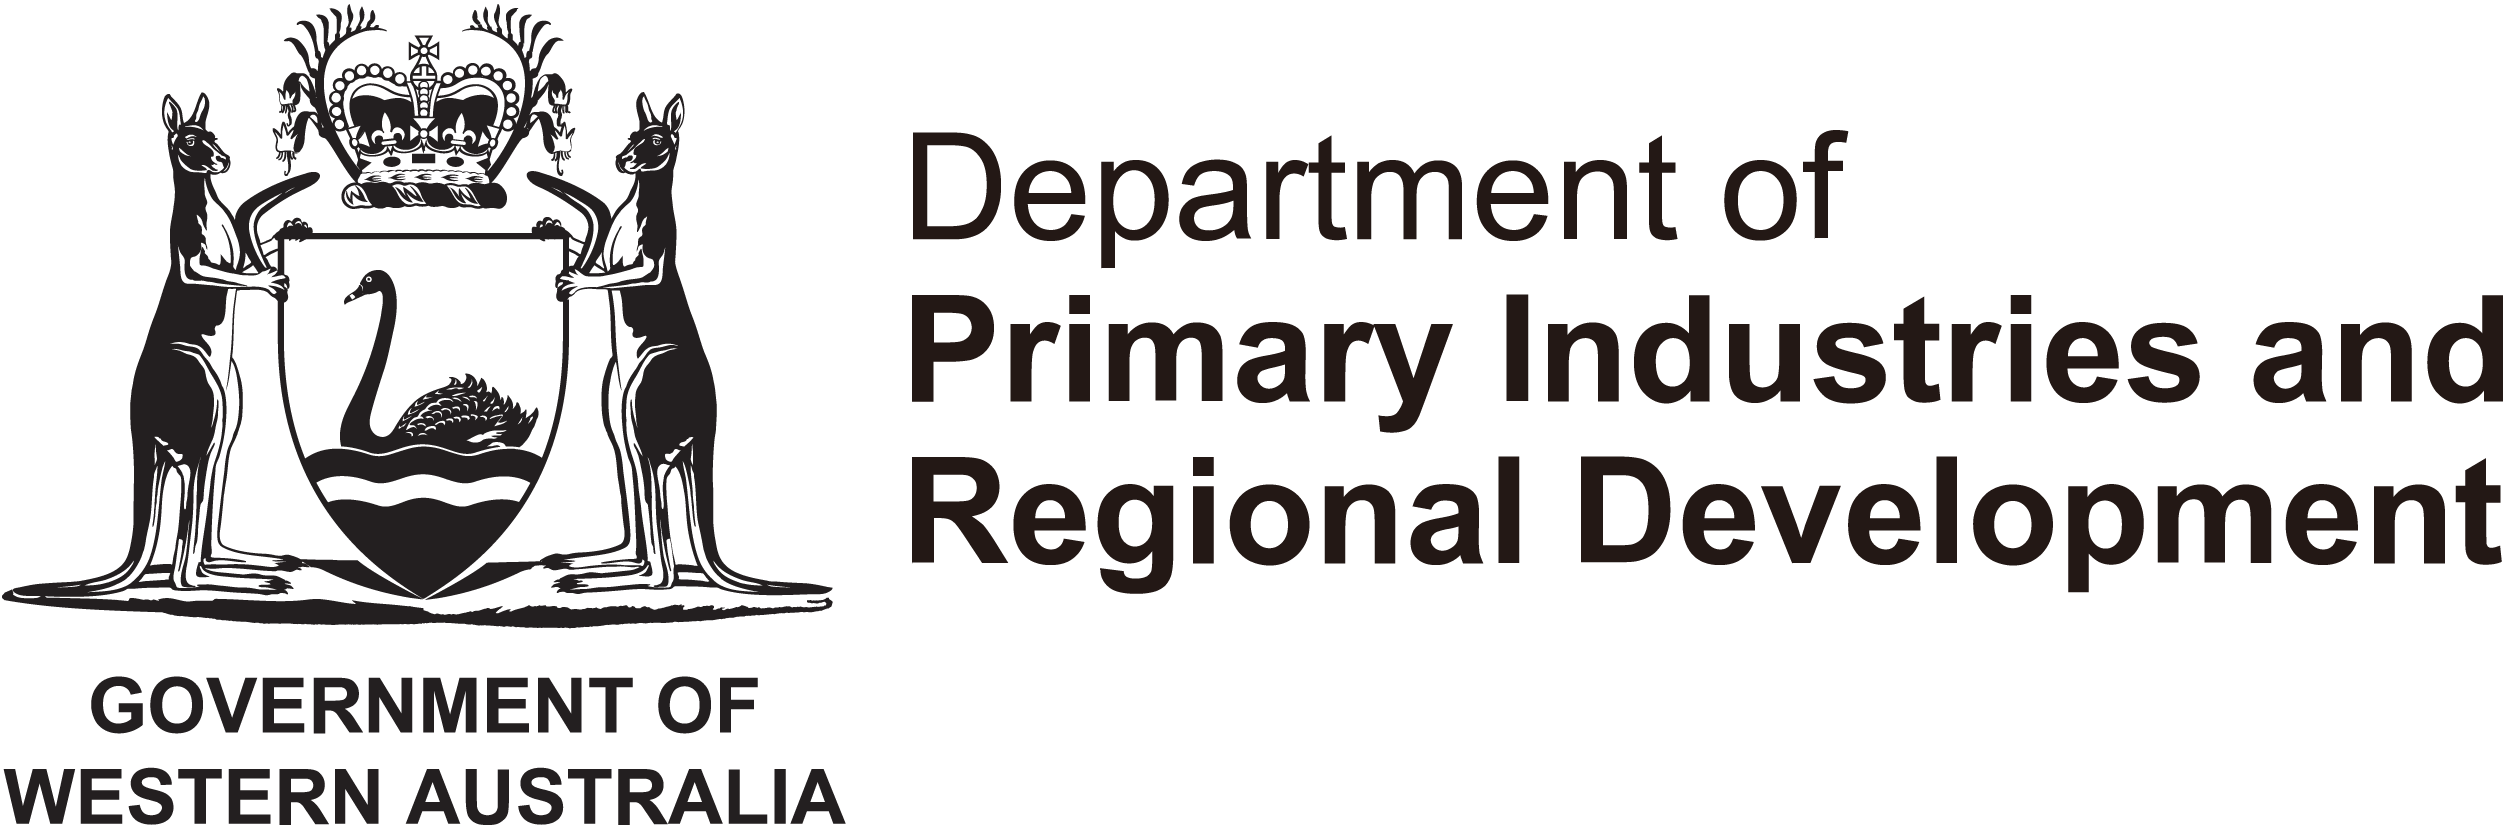 government-of-western-australian-department-of-primary-industries-and-regional-development-logo